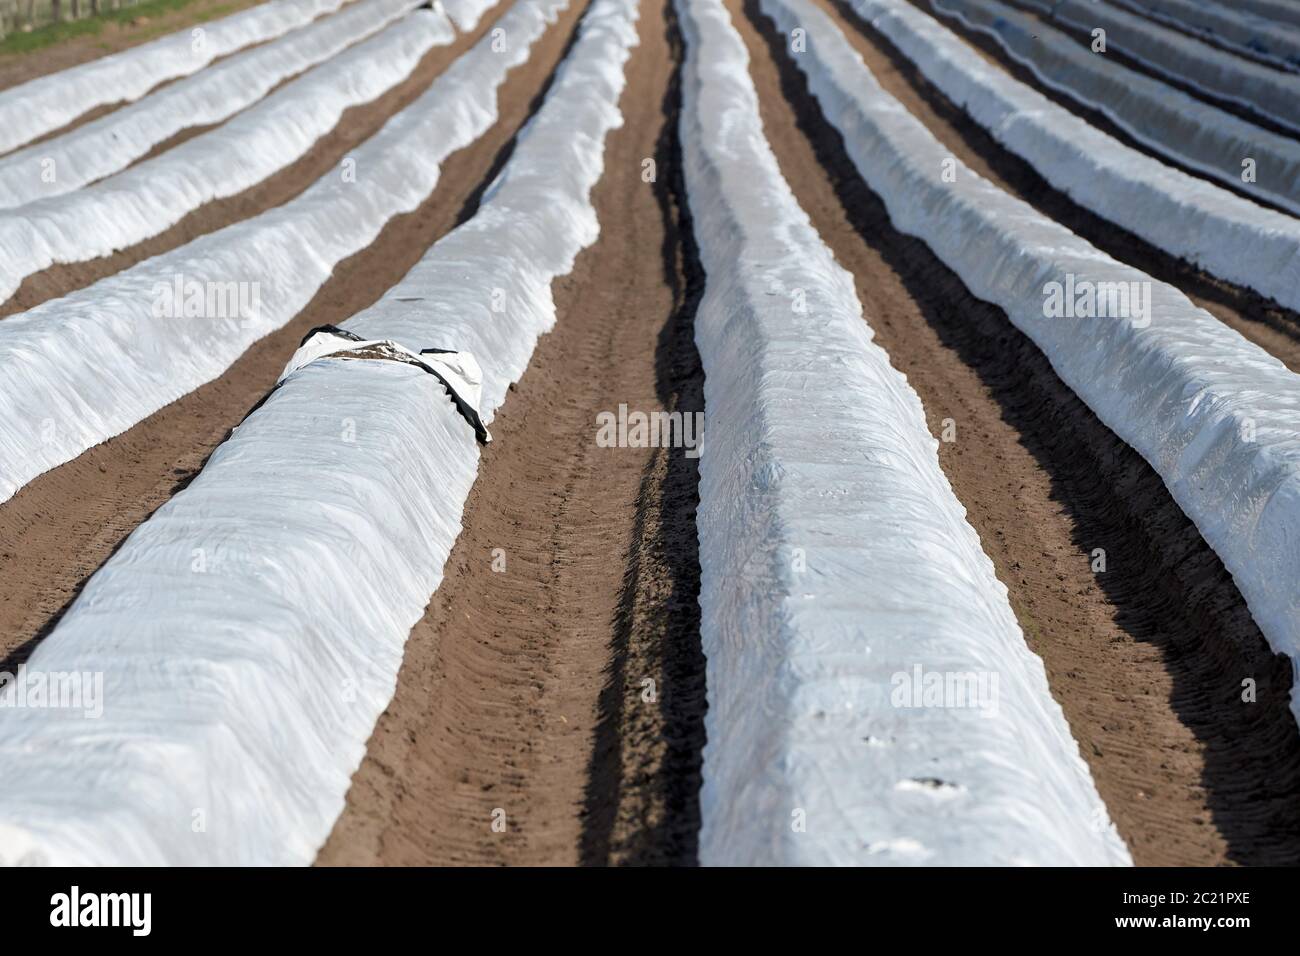 a foil-covered asparagus field for early spring harvest Stock Photo